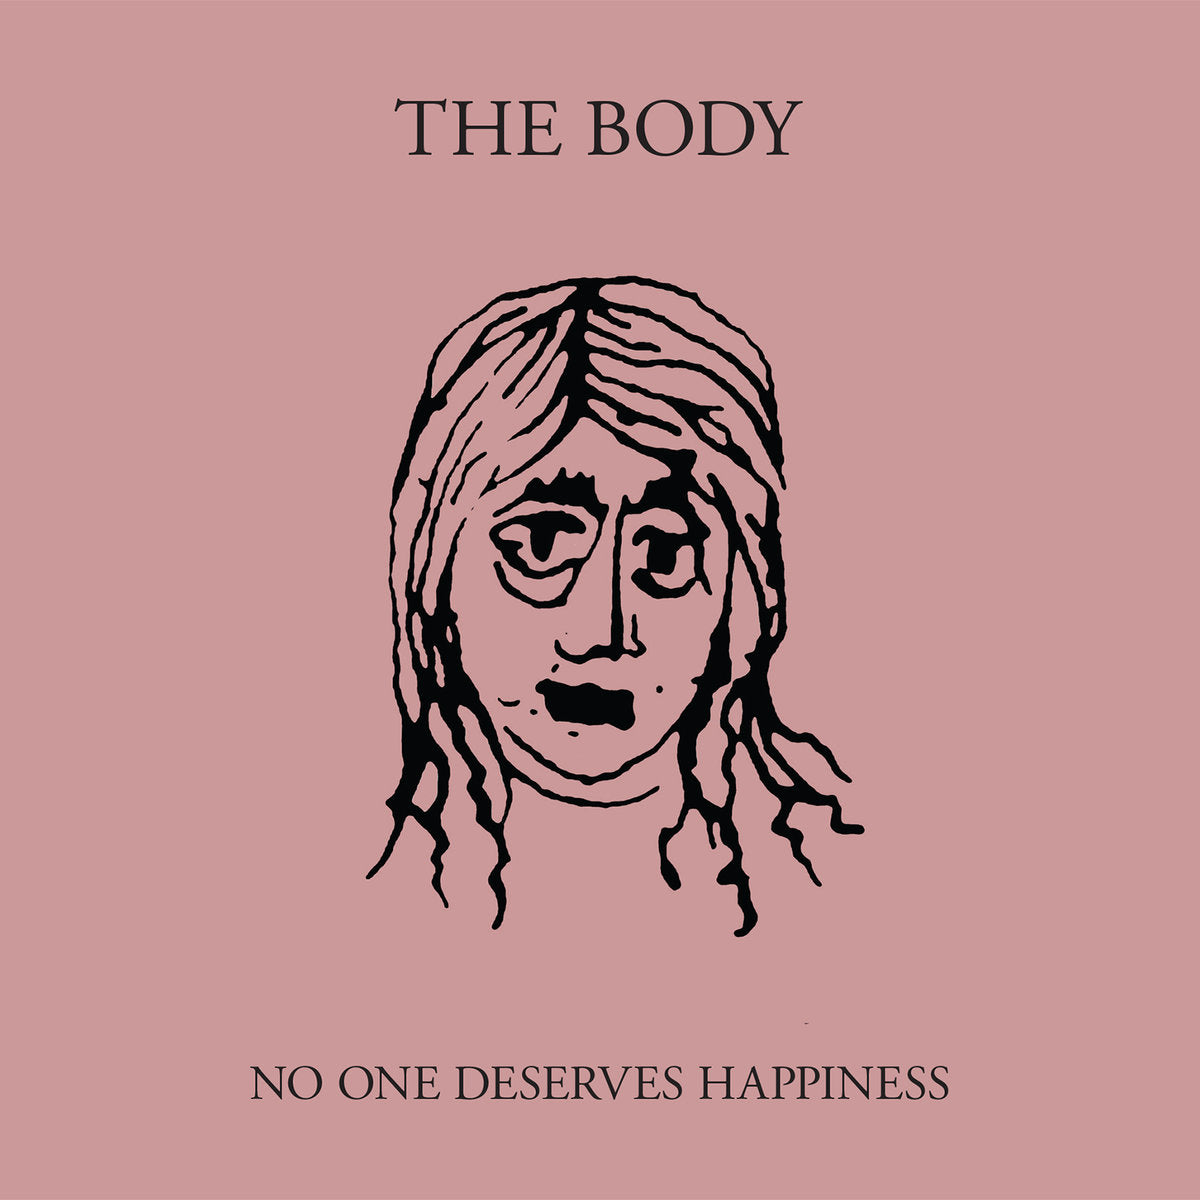 THE BODY "No One Deserves Happiness" 2xLP